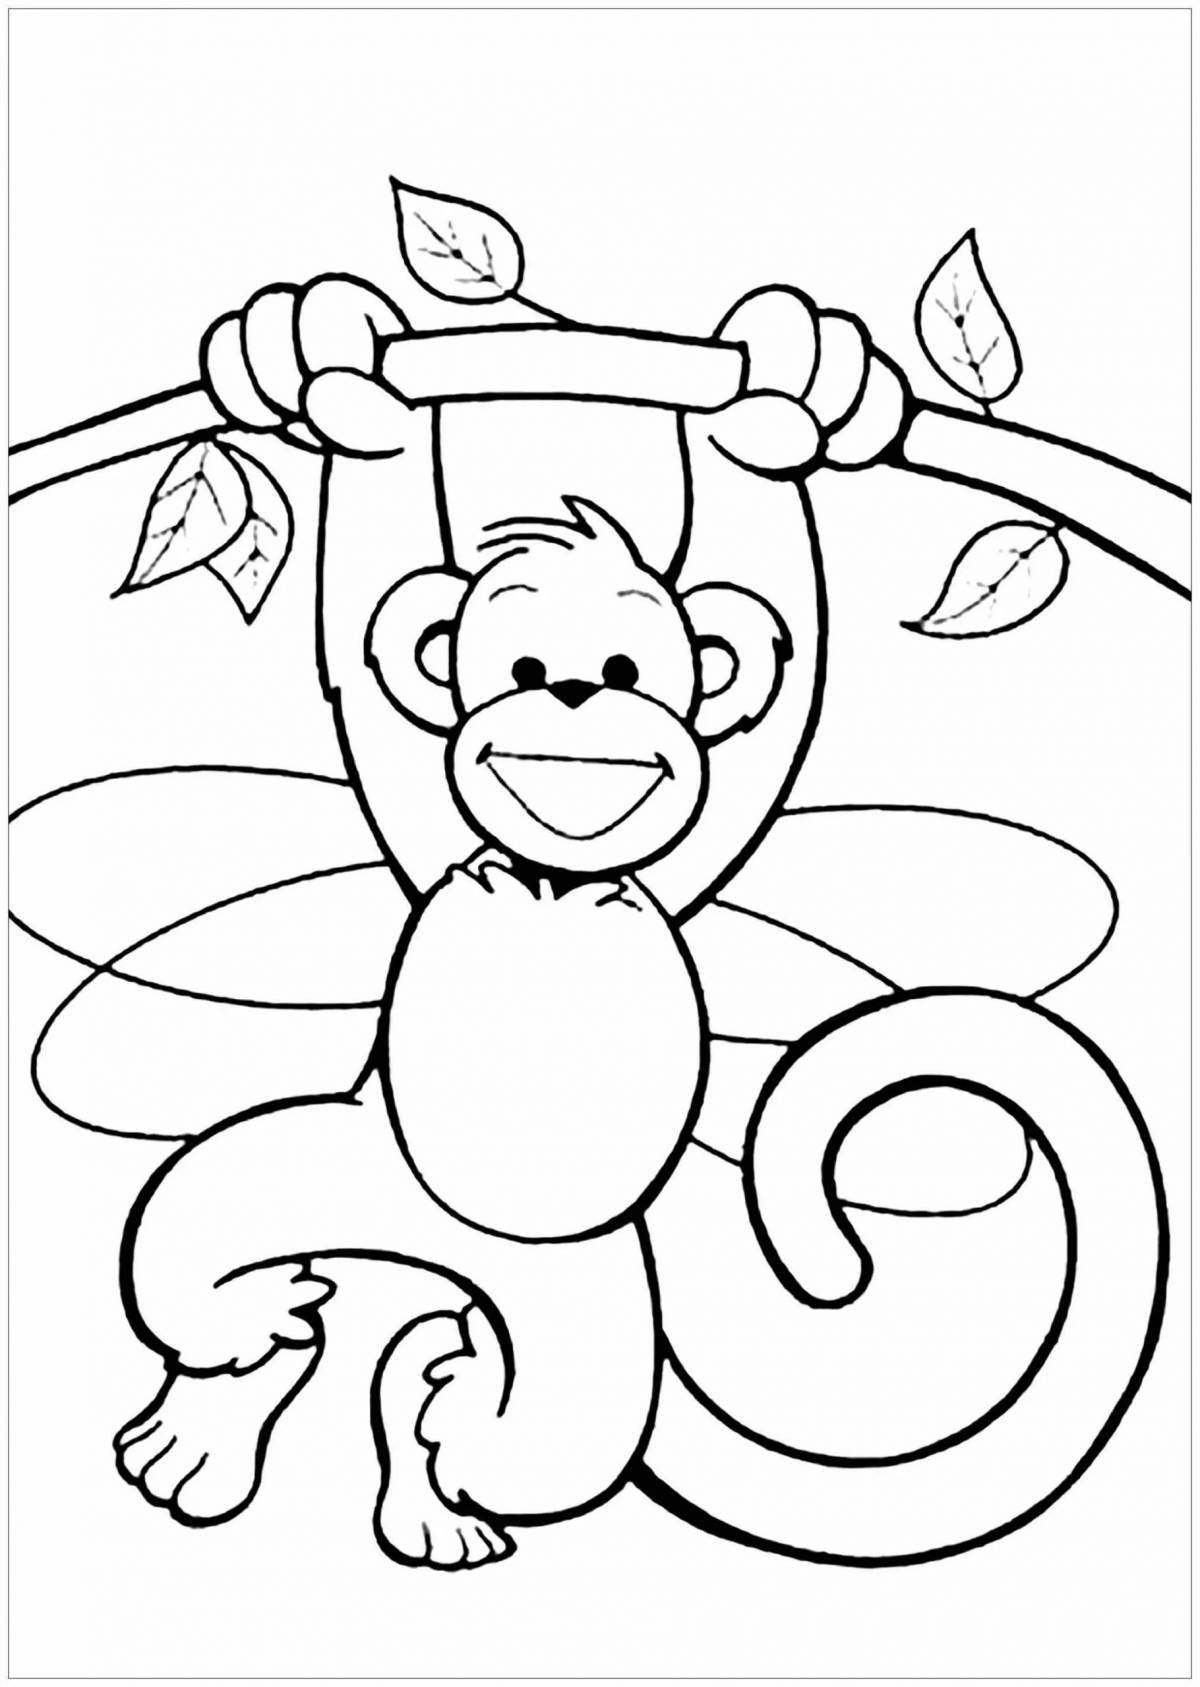 Great monkey coloring book for kids